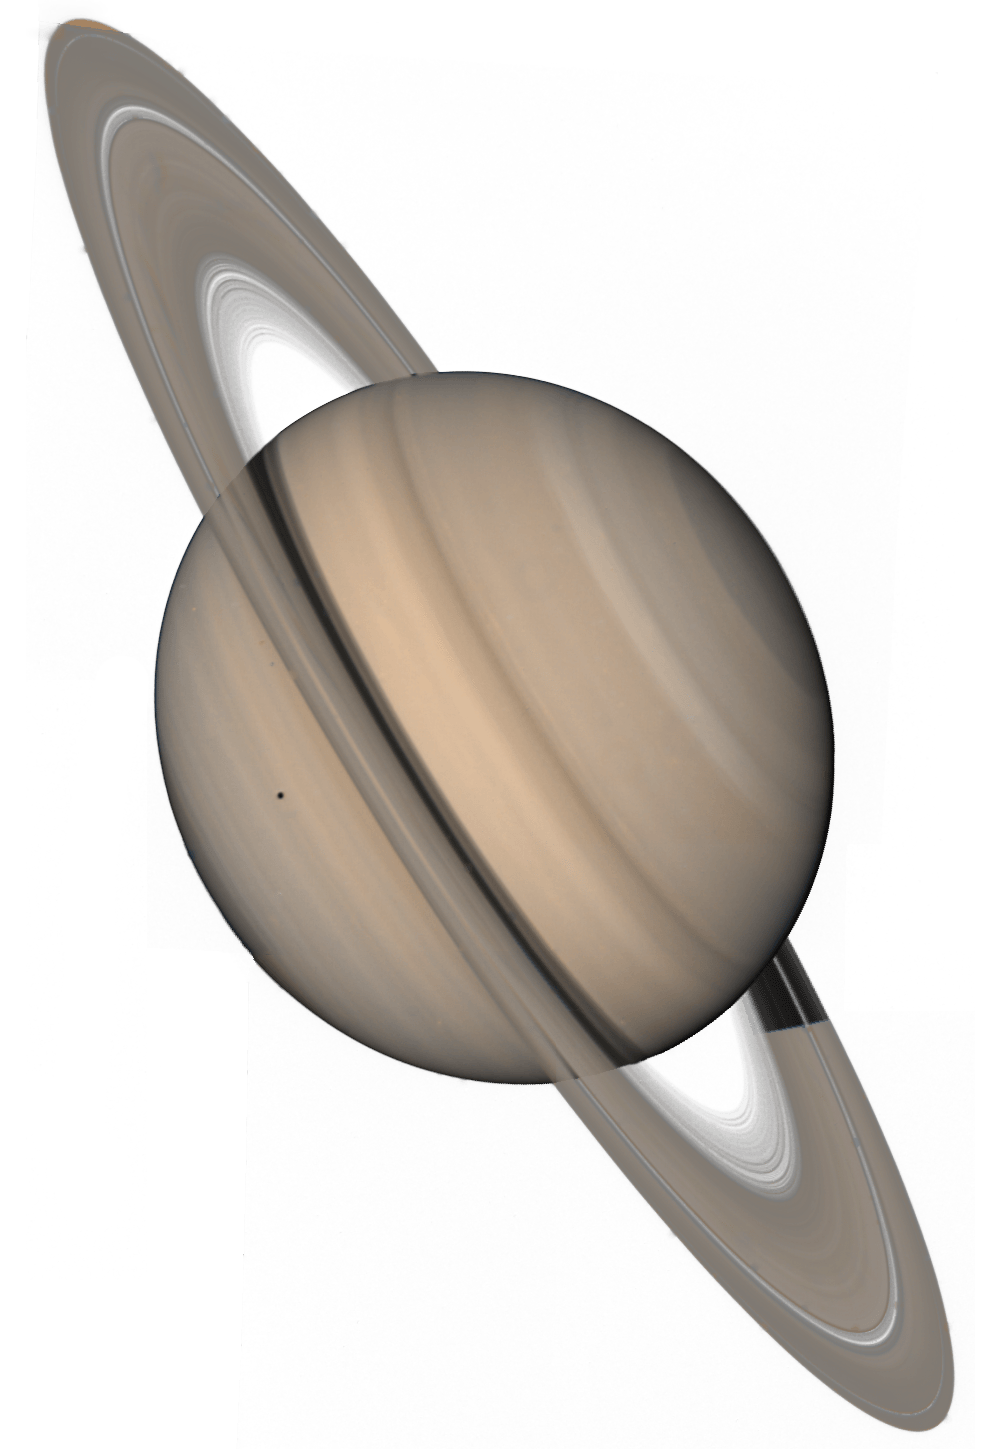 Planet Saturn associated with the numerology of 62